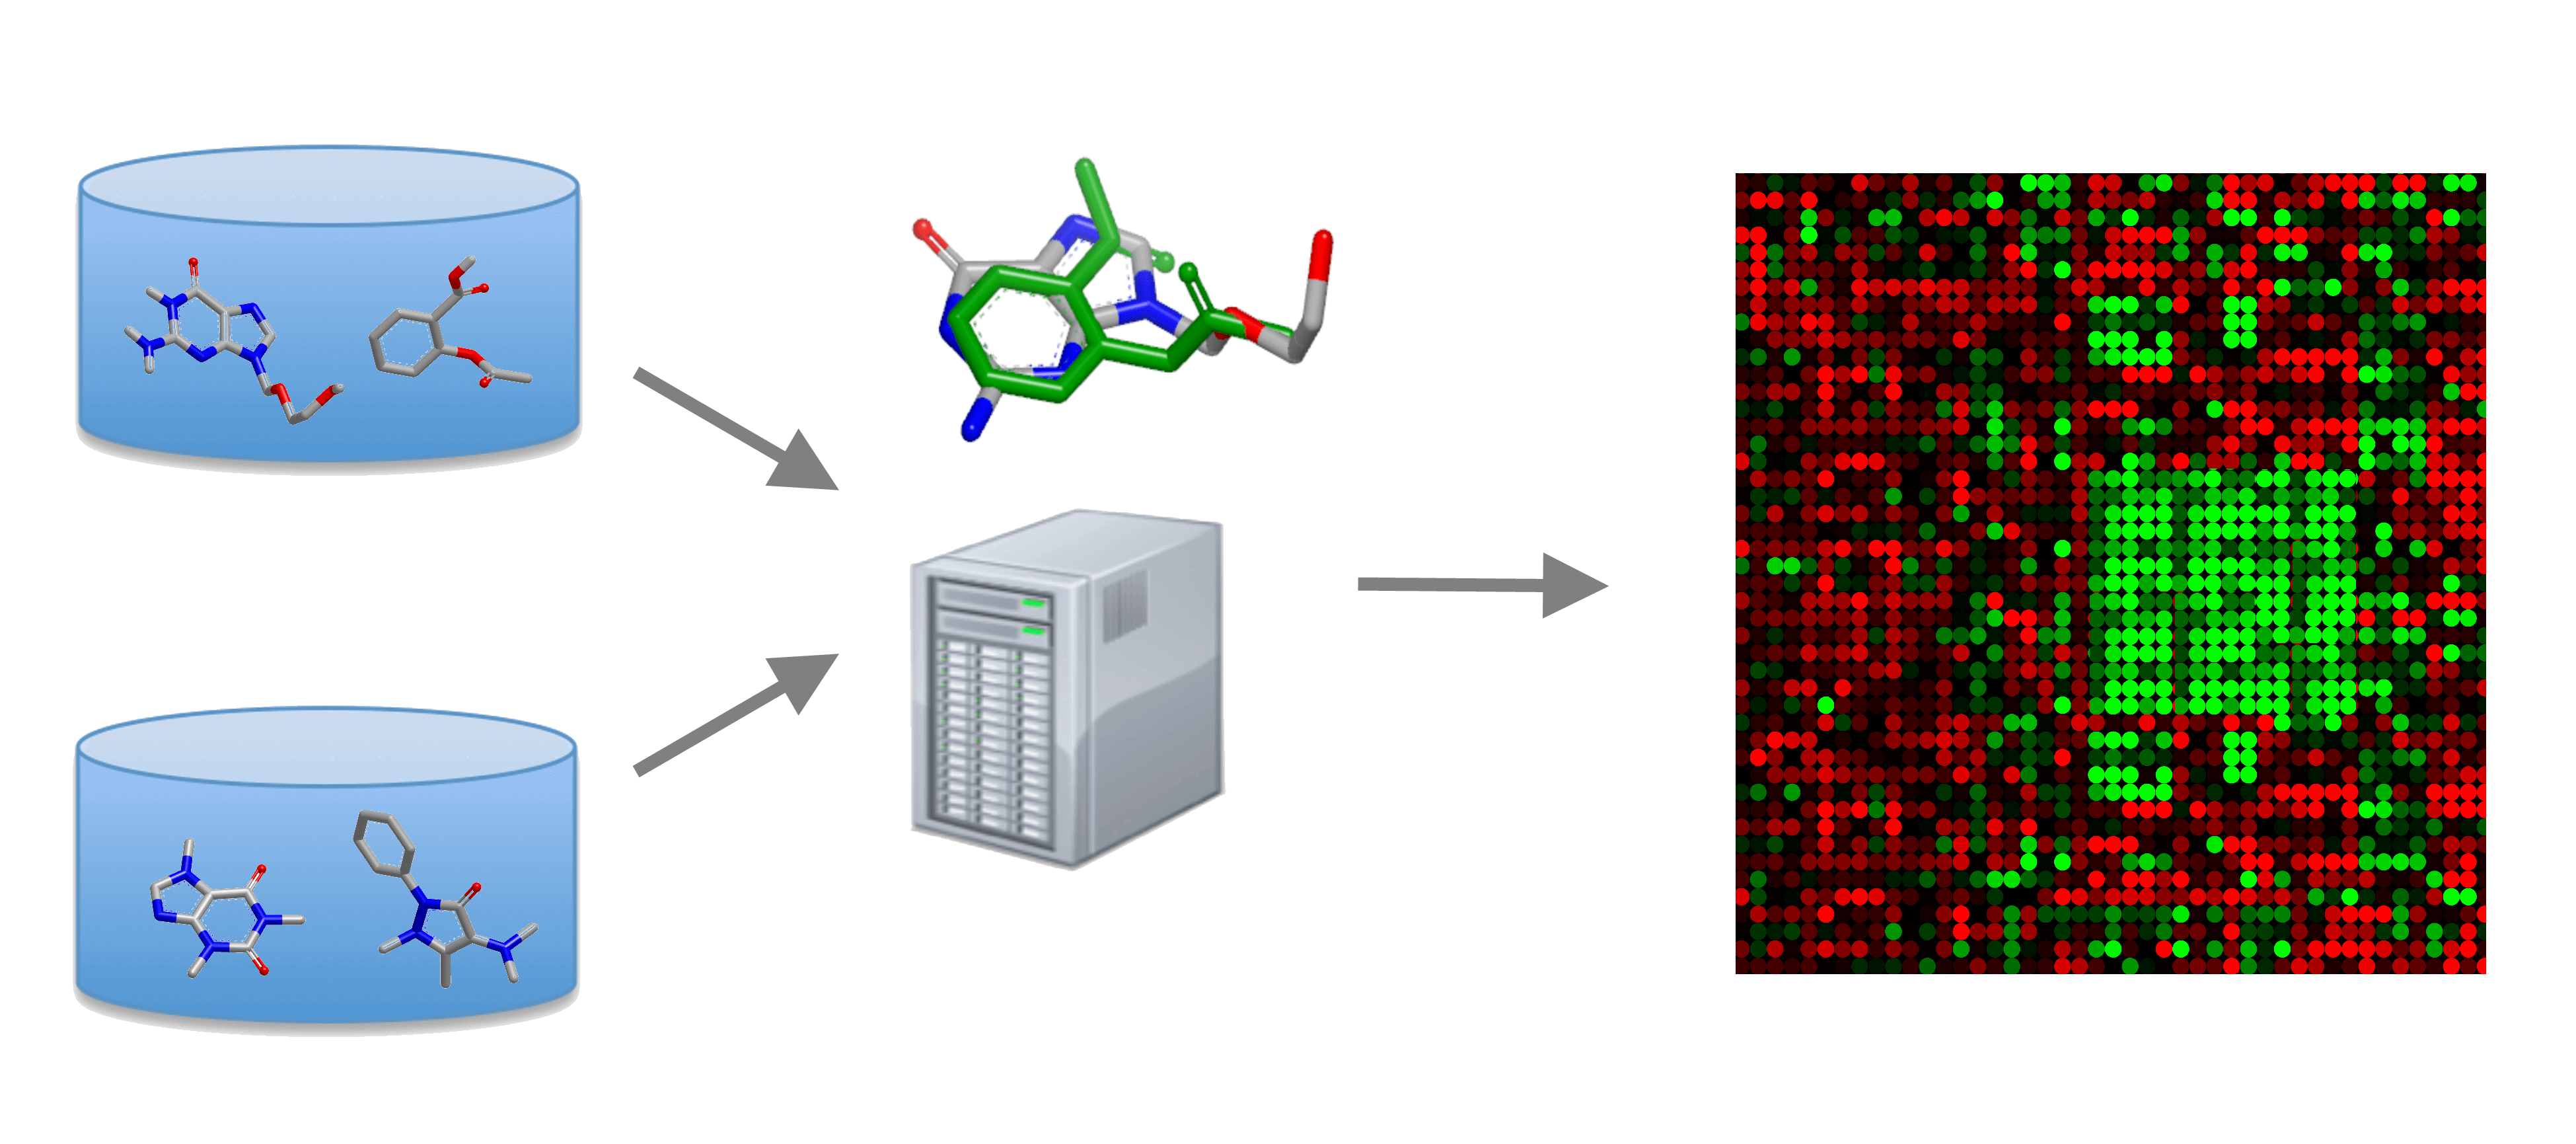 The image illustrates how we have modified the FastROCS server for one of our customers. Instead of using only one query molecule to screen a database for similar compounds, we have implemented a workflow where 3D similarity values for each molecule against all the other structures is calculated. This has enabled the user to create a similarity matrix which was used to identify the cluster of highly similar/ dissimilar structures.